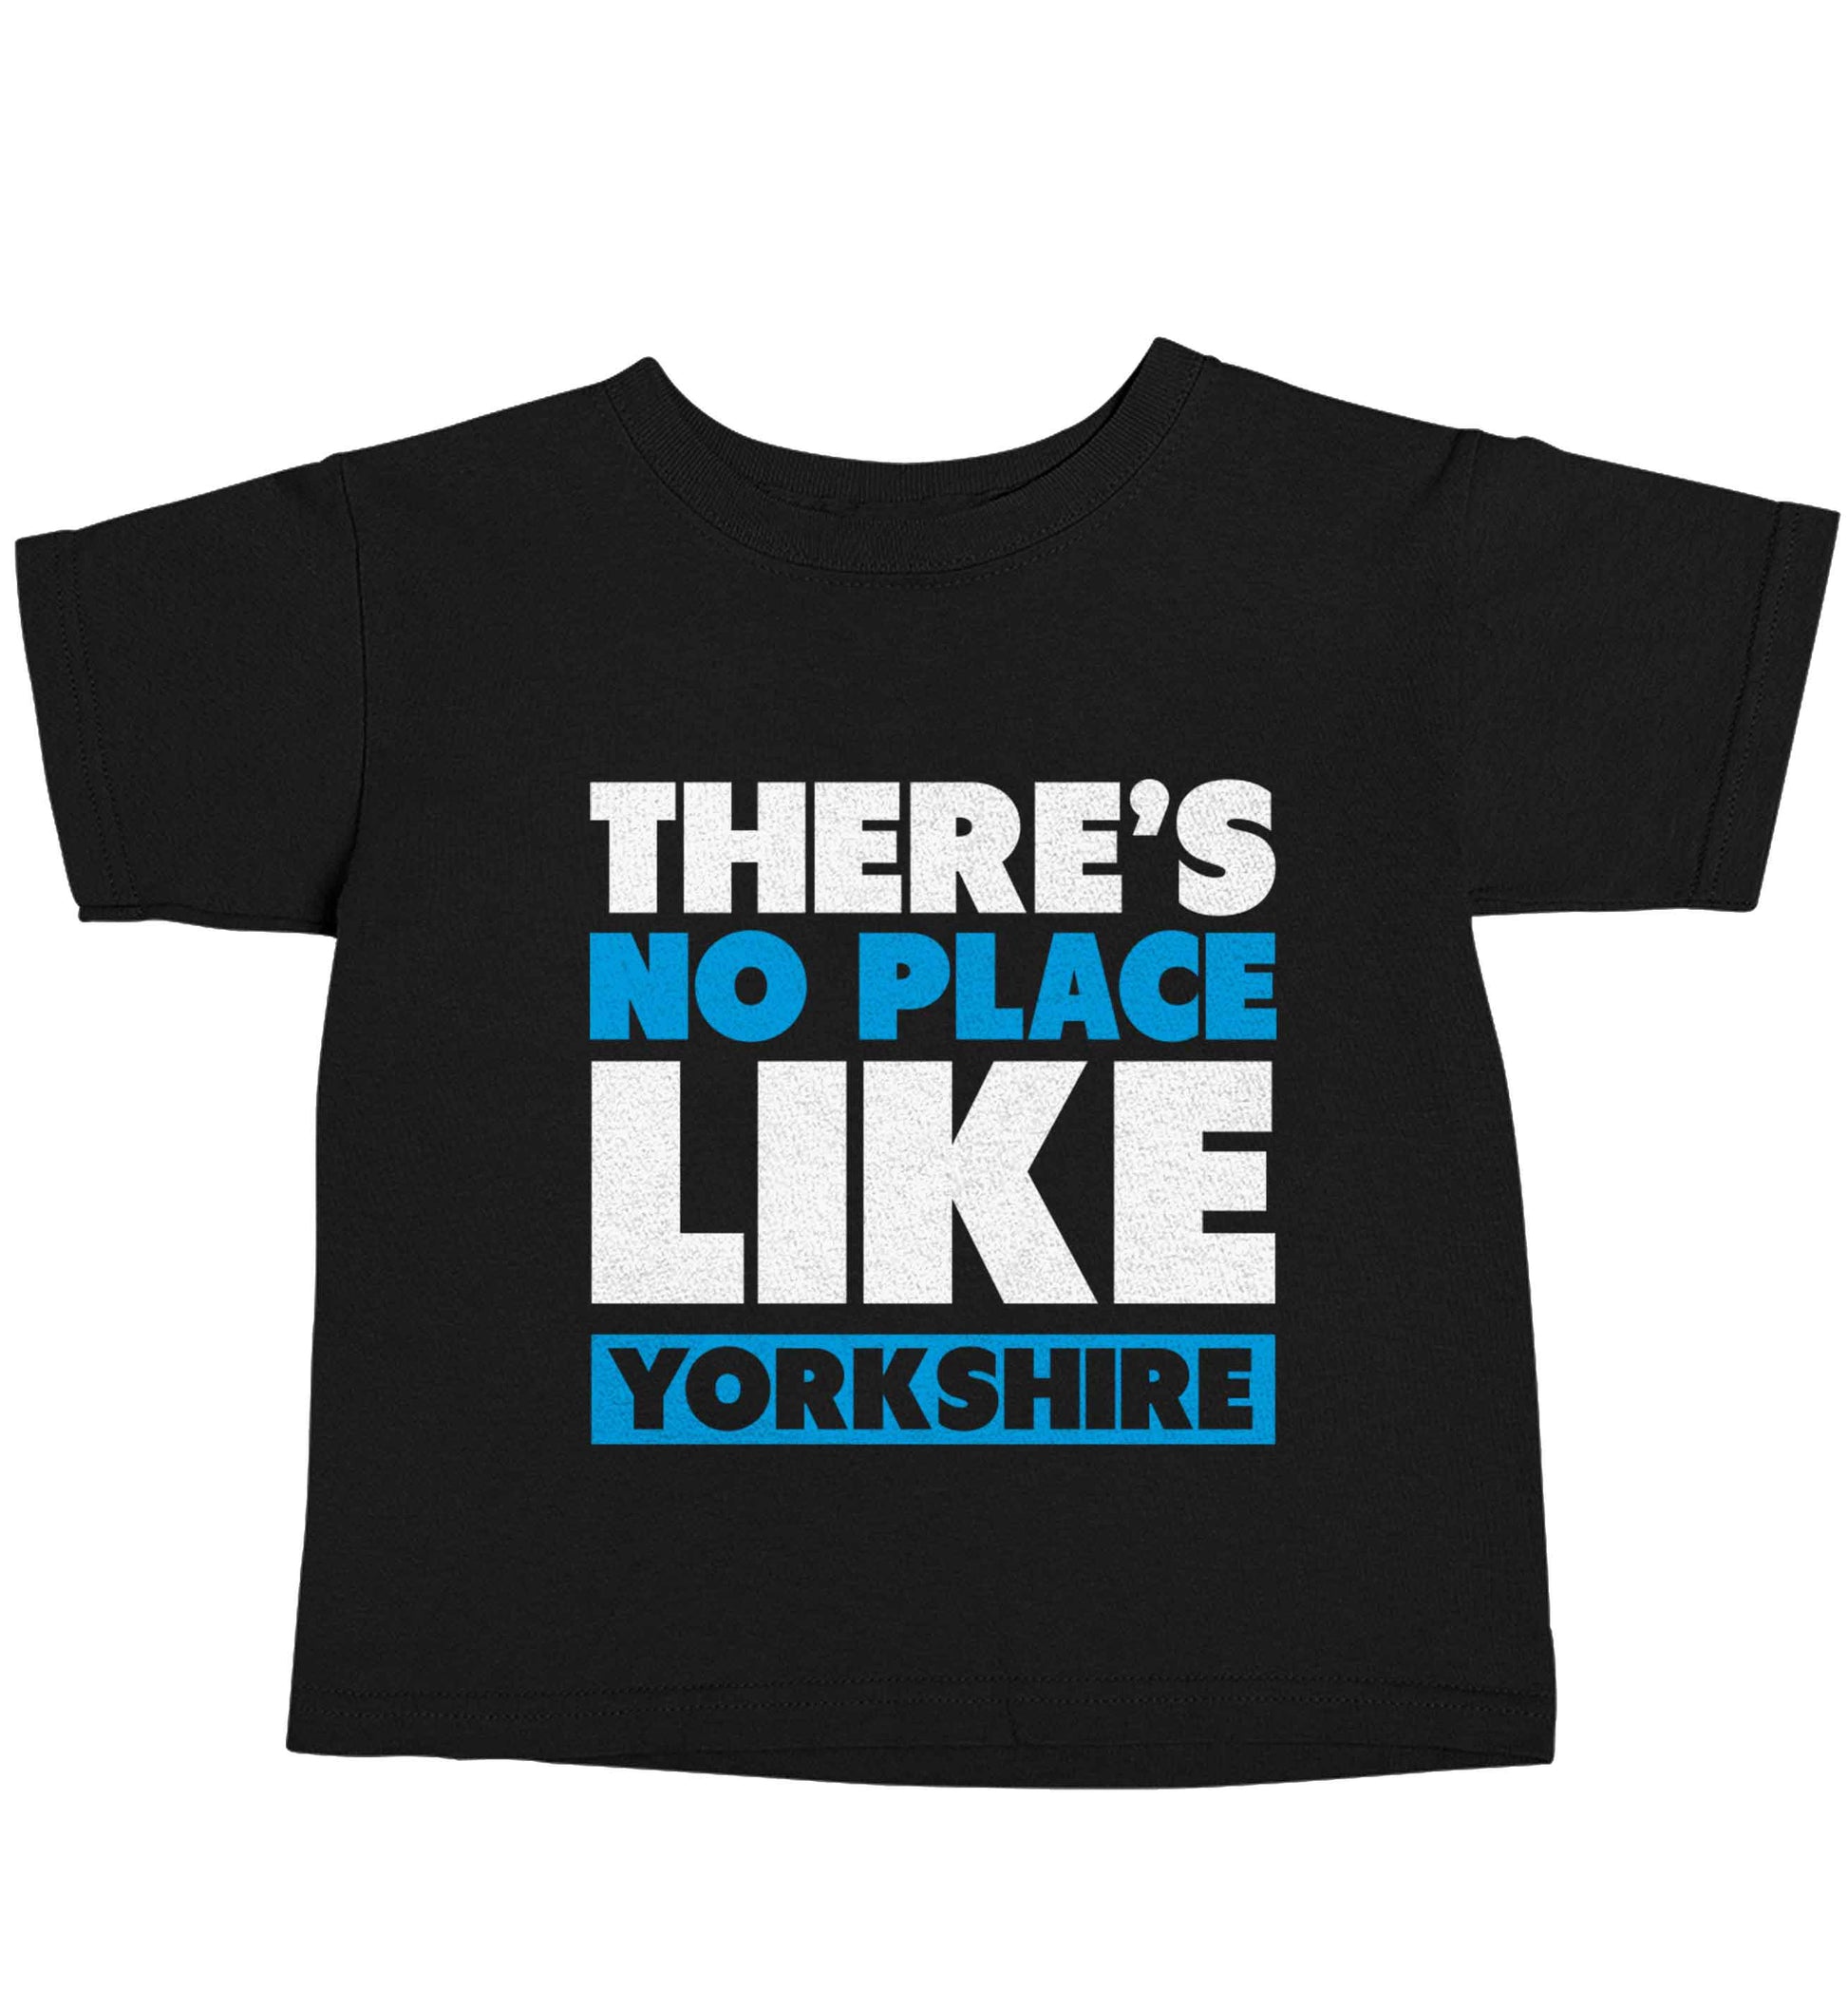 There's no place like Yorkshire Black baby toddler Tshirt 2 years